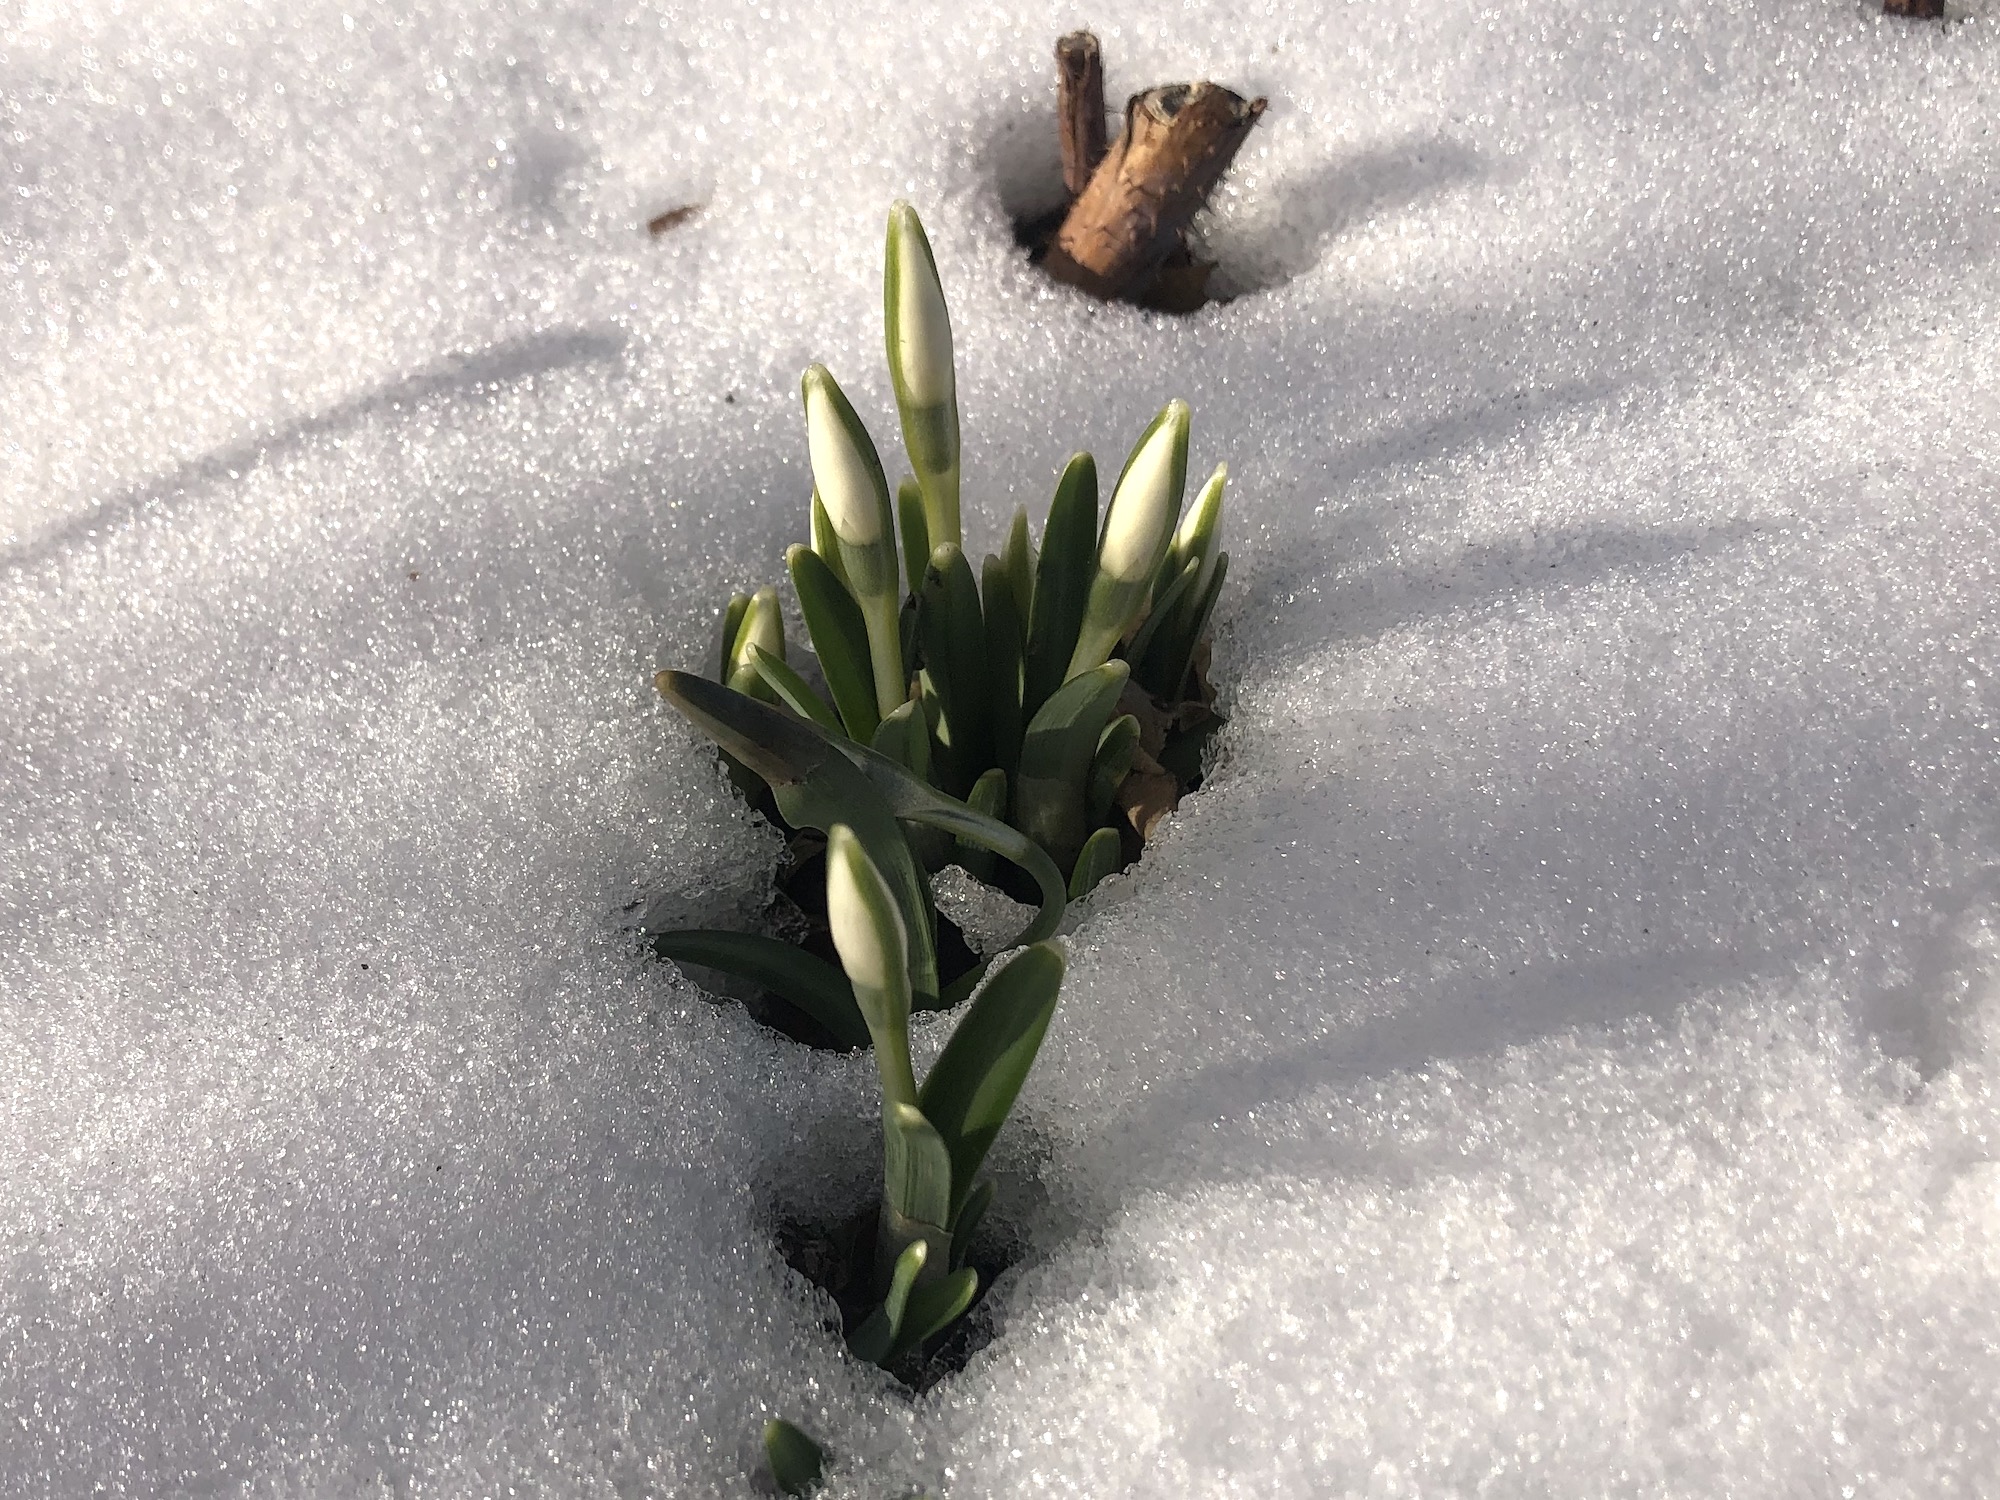 Snowdrops emerging in Madison Wisconsin along Arbor Drive on February 19, 2023.